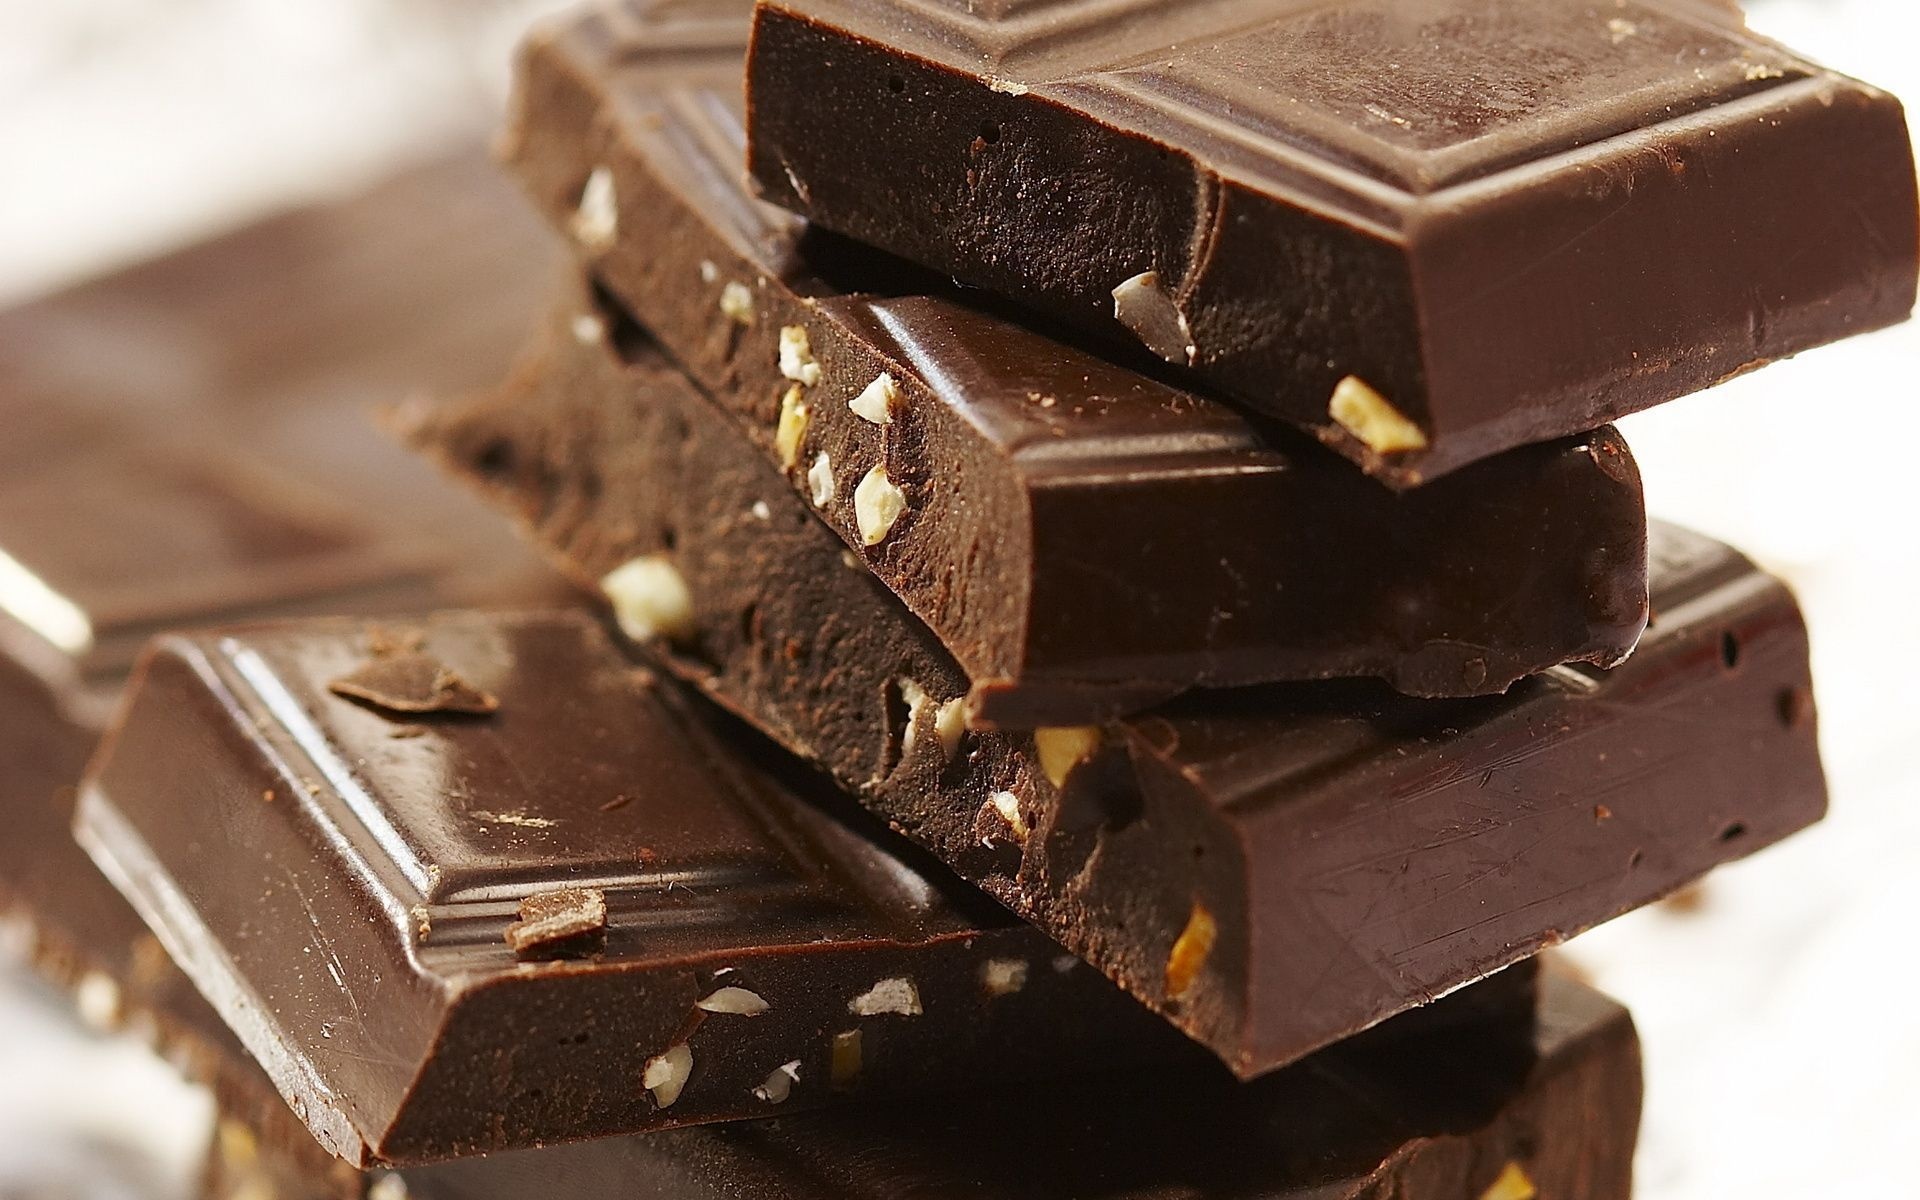 Chocolate: Made with cocoa solids, cocoa butter, milk solids, and sugar. 1920x1200 HD Wallpaper.